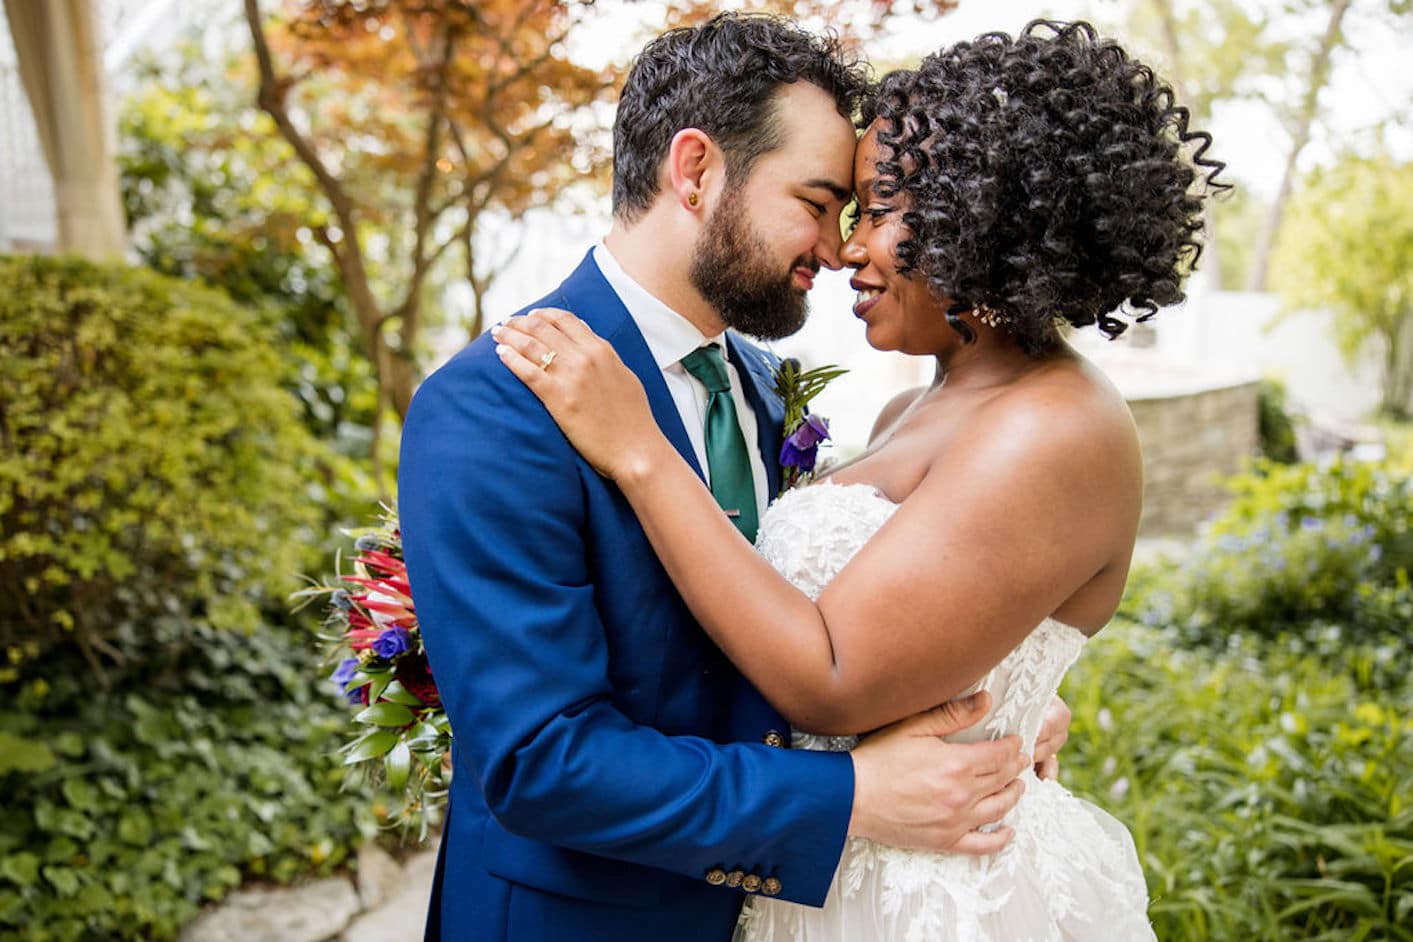 A Bold and Beautiful Spring Garden Wedding In Green & Gold | April 30